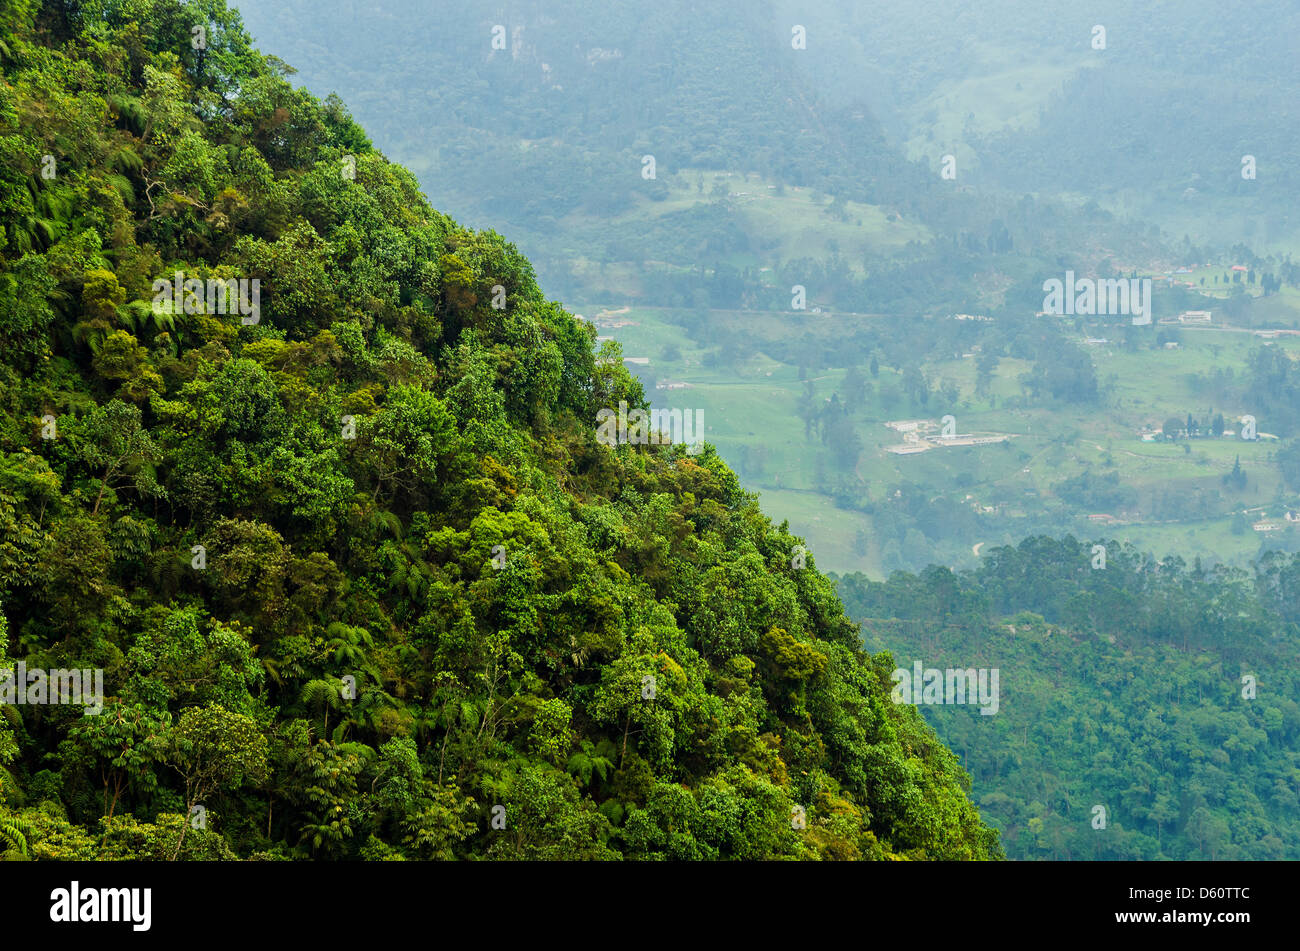 Lush green jungle covered hill with a valley in the background Stock Photo